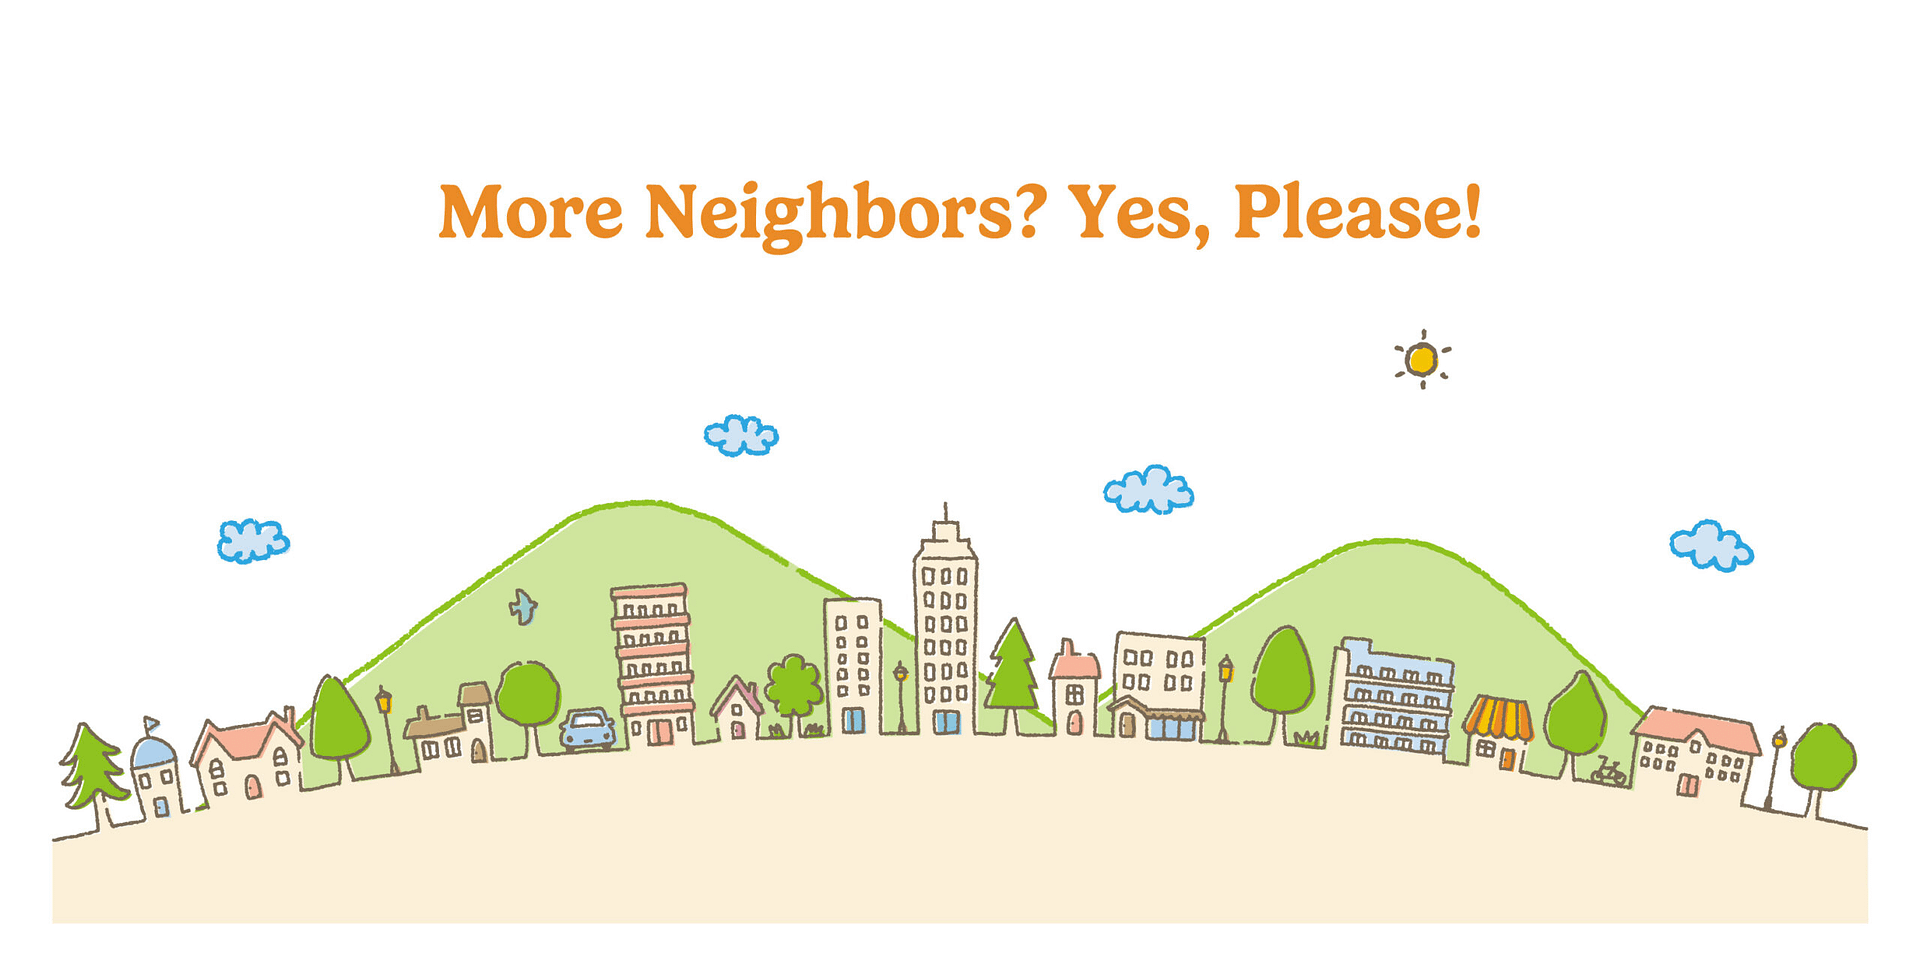 More Neighbors? Yes, Please!